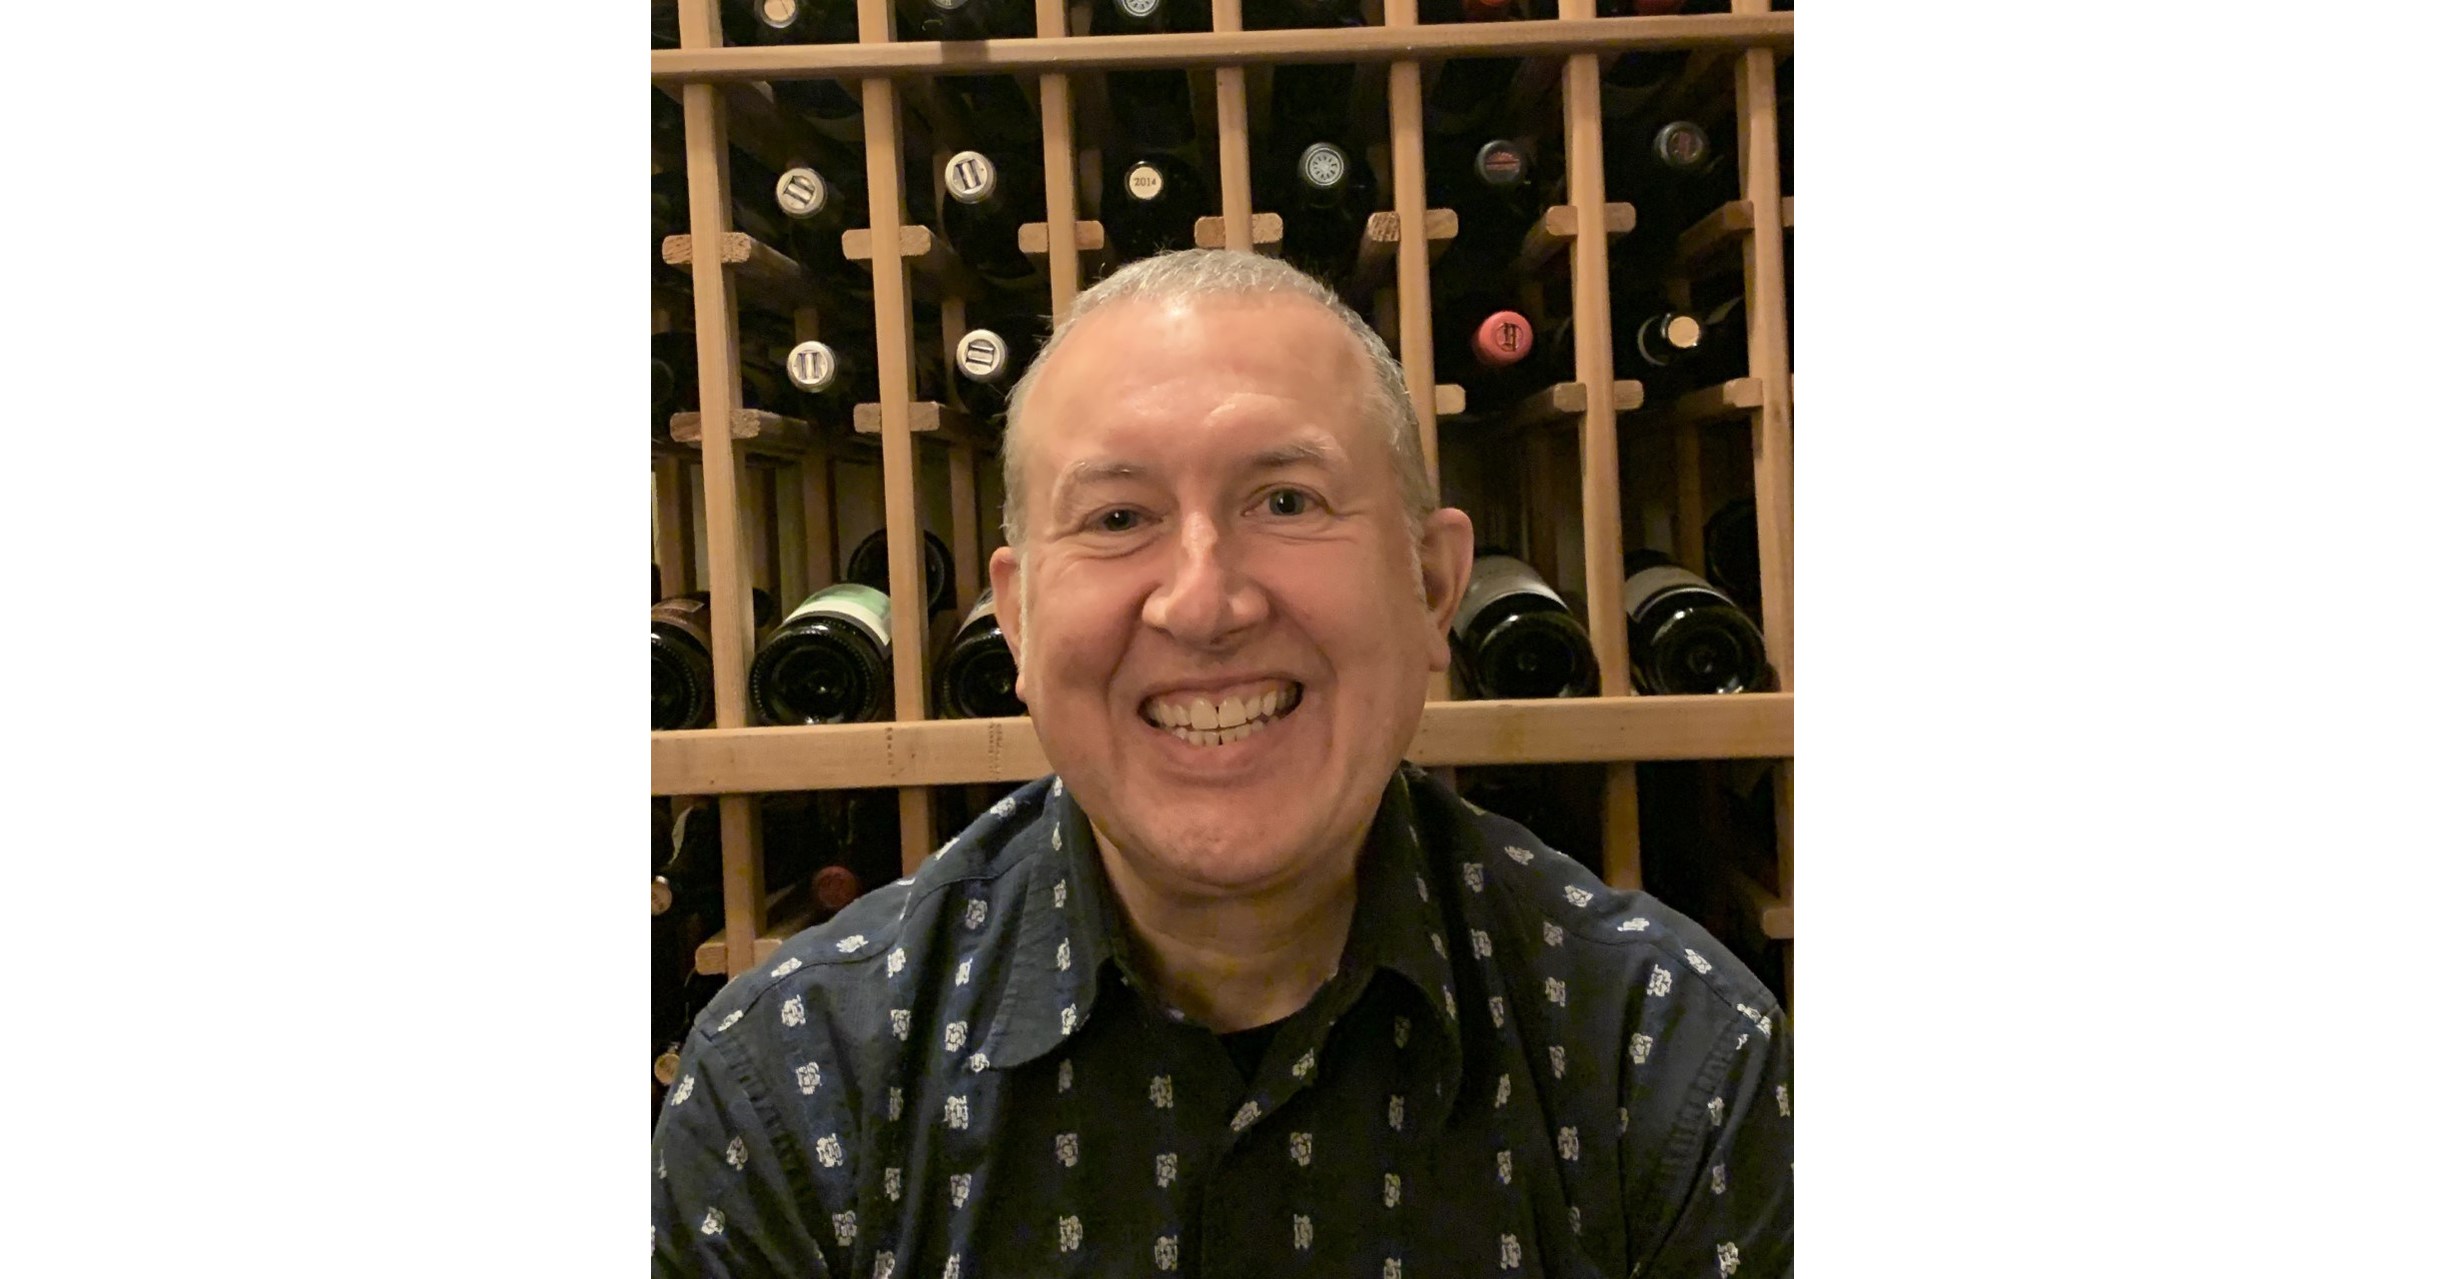 WineBid Appoints Marty Sparks as Director of Engineering to Accelerate Innovations in Online Wine Auctions and Ecommerce